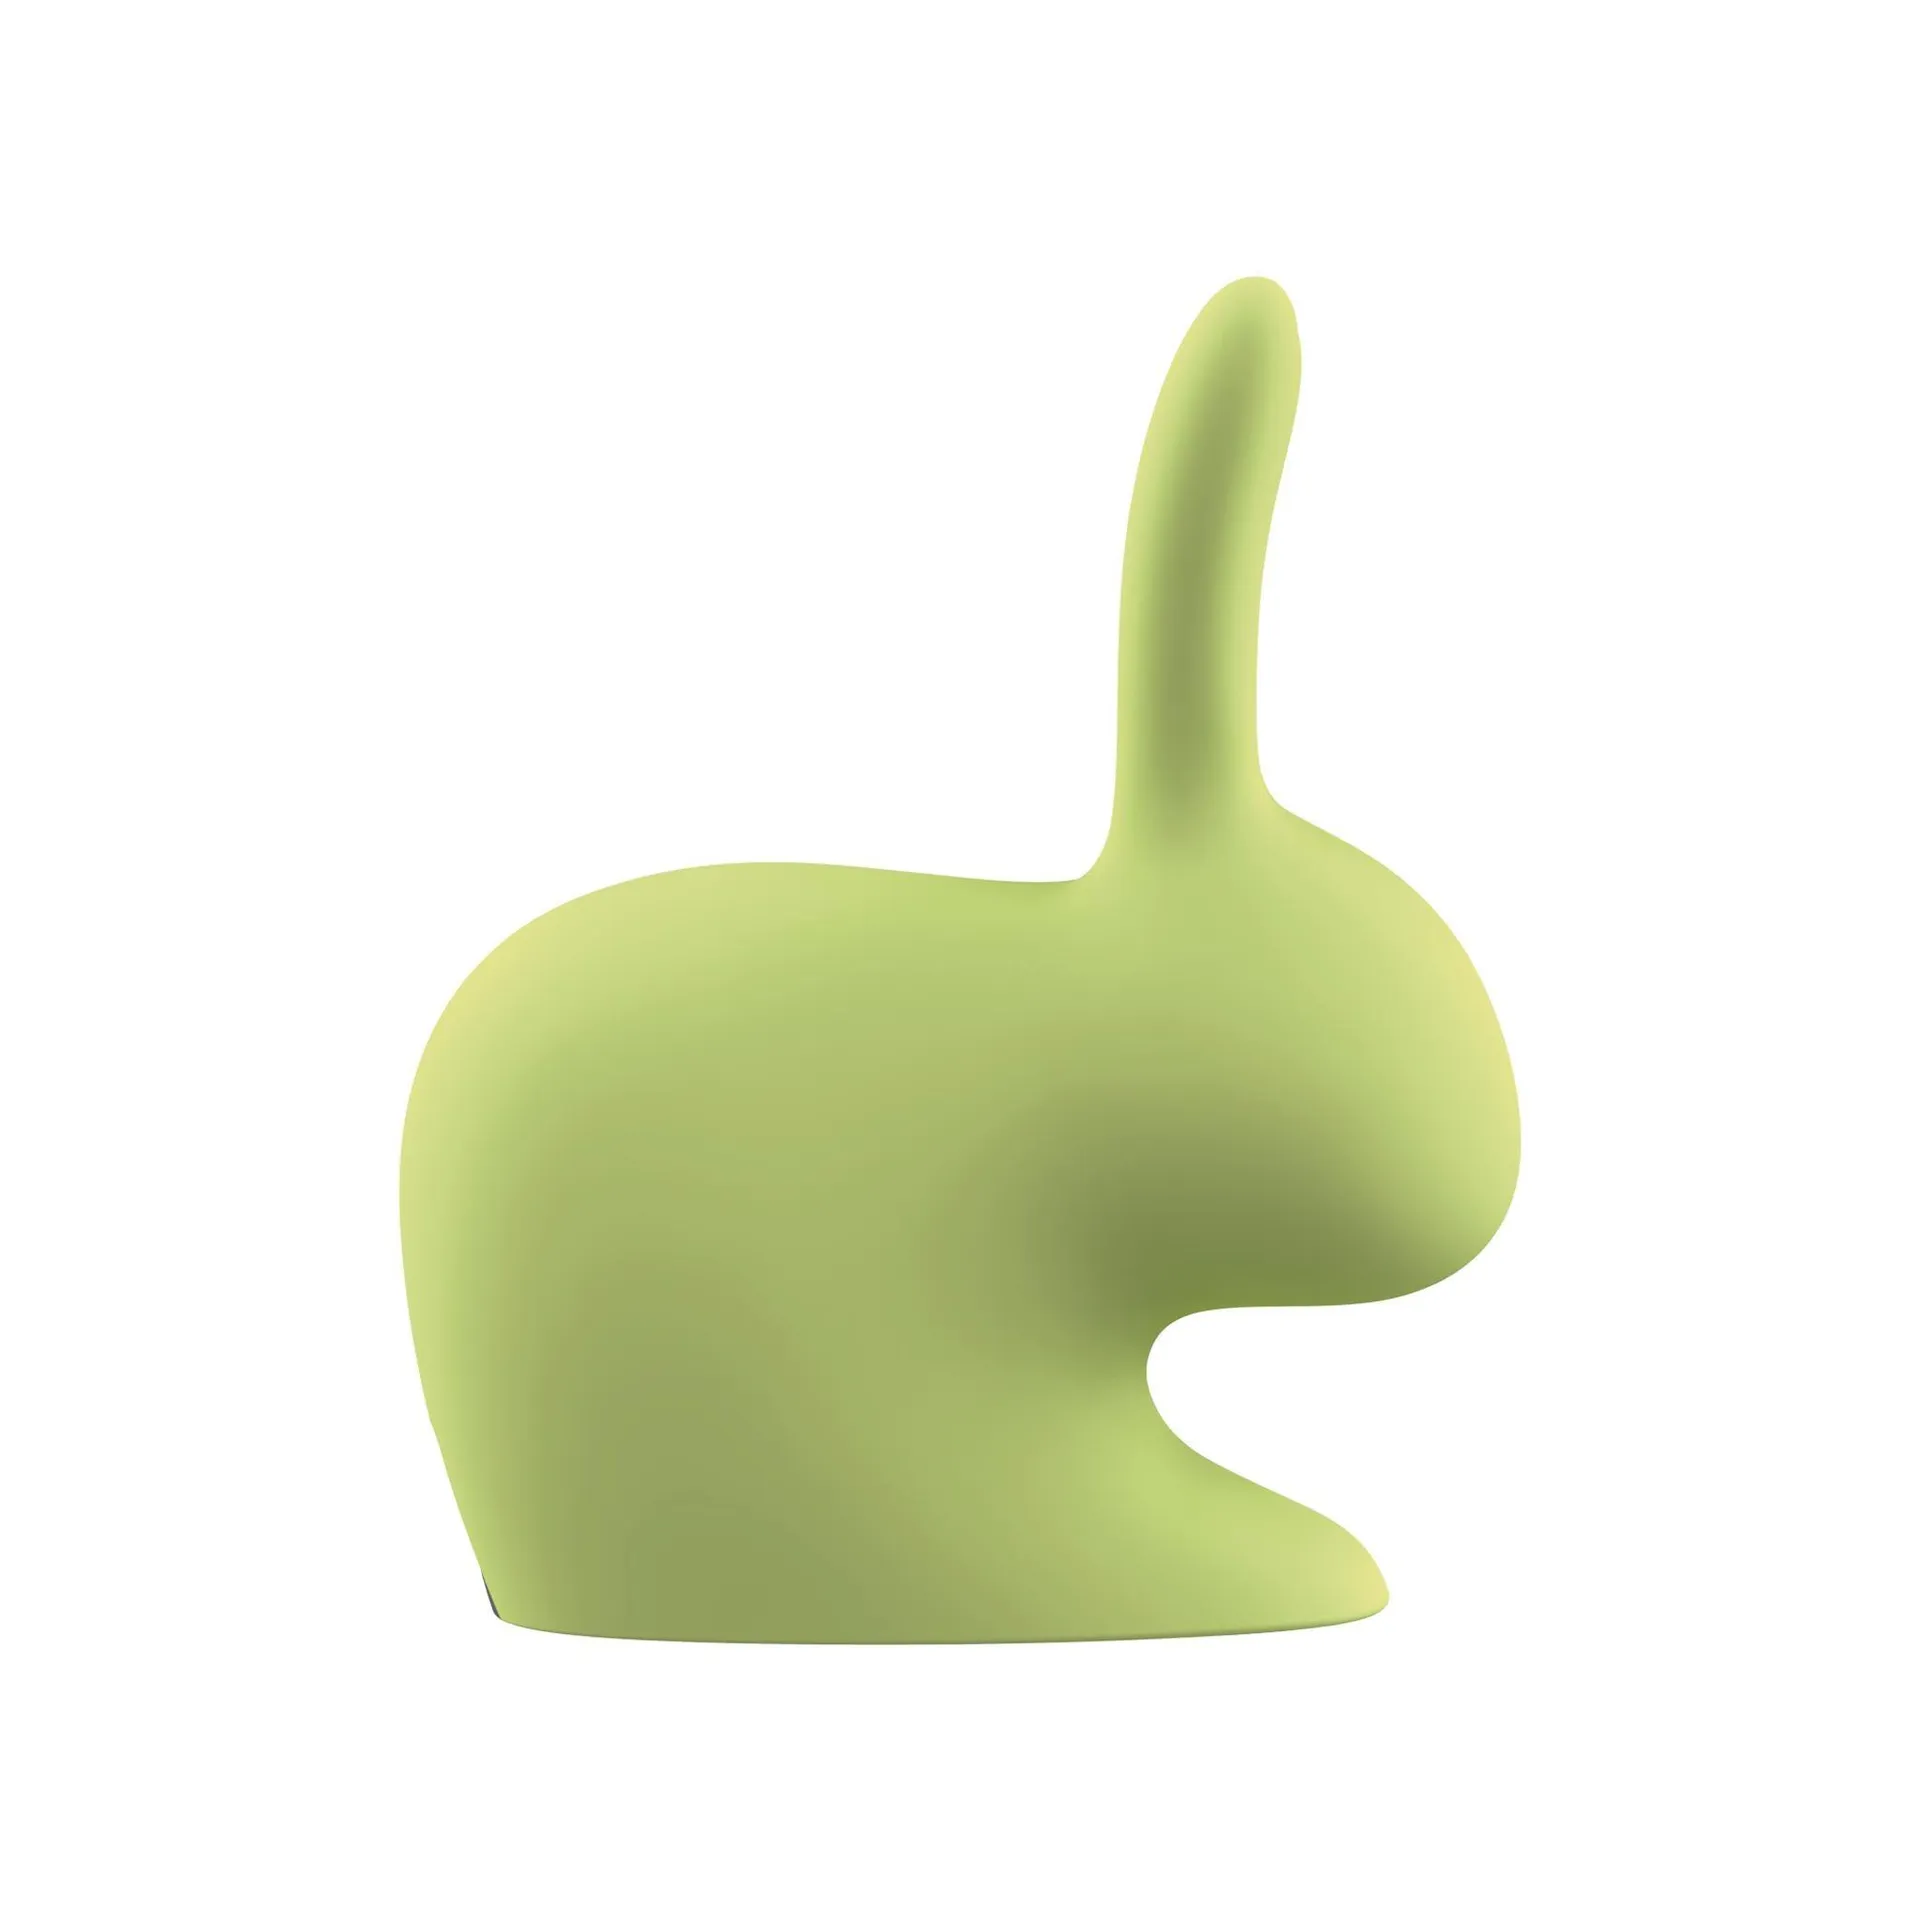 In Stock in Los Angeles, Green Rabbit Mini Portable Charger